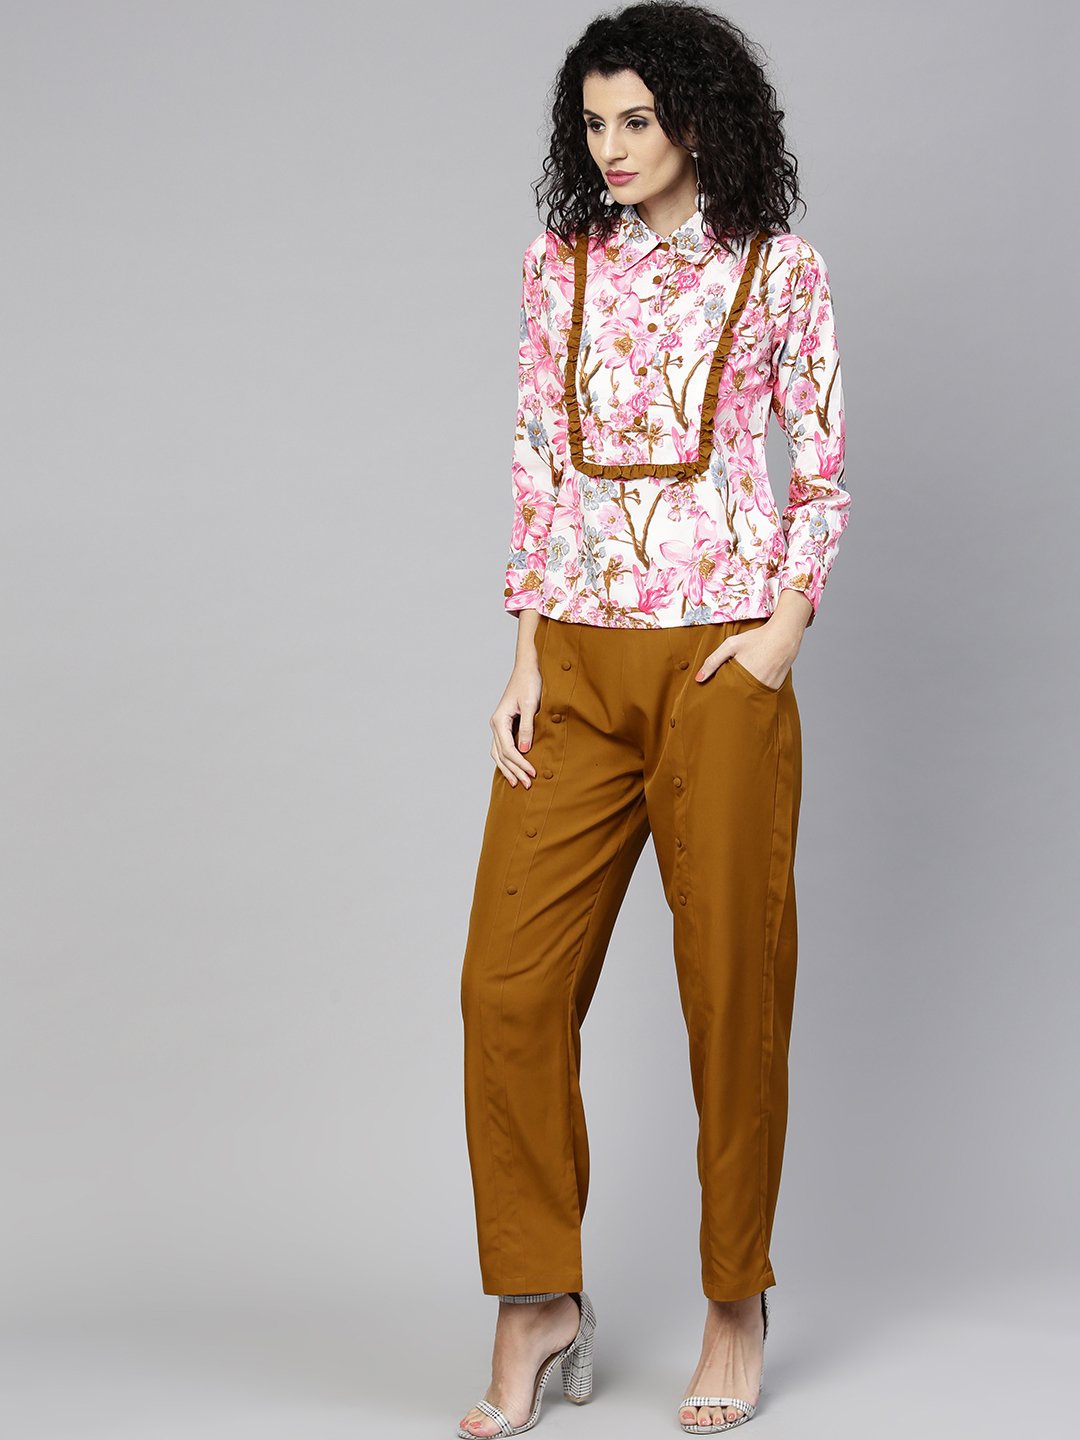 Women's Pink & Mustard Yellow Printed Top With Trousers - Nayo Clothing